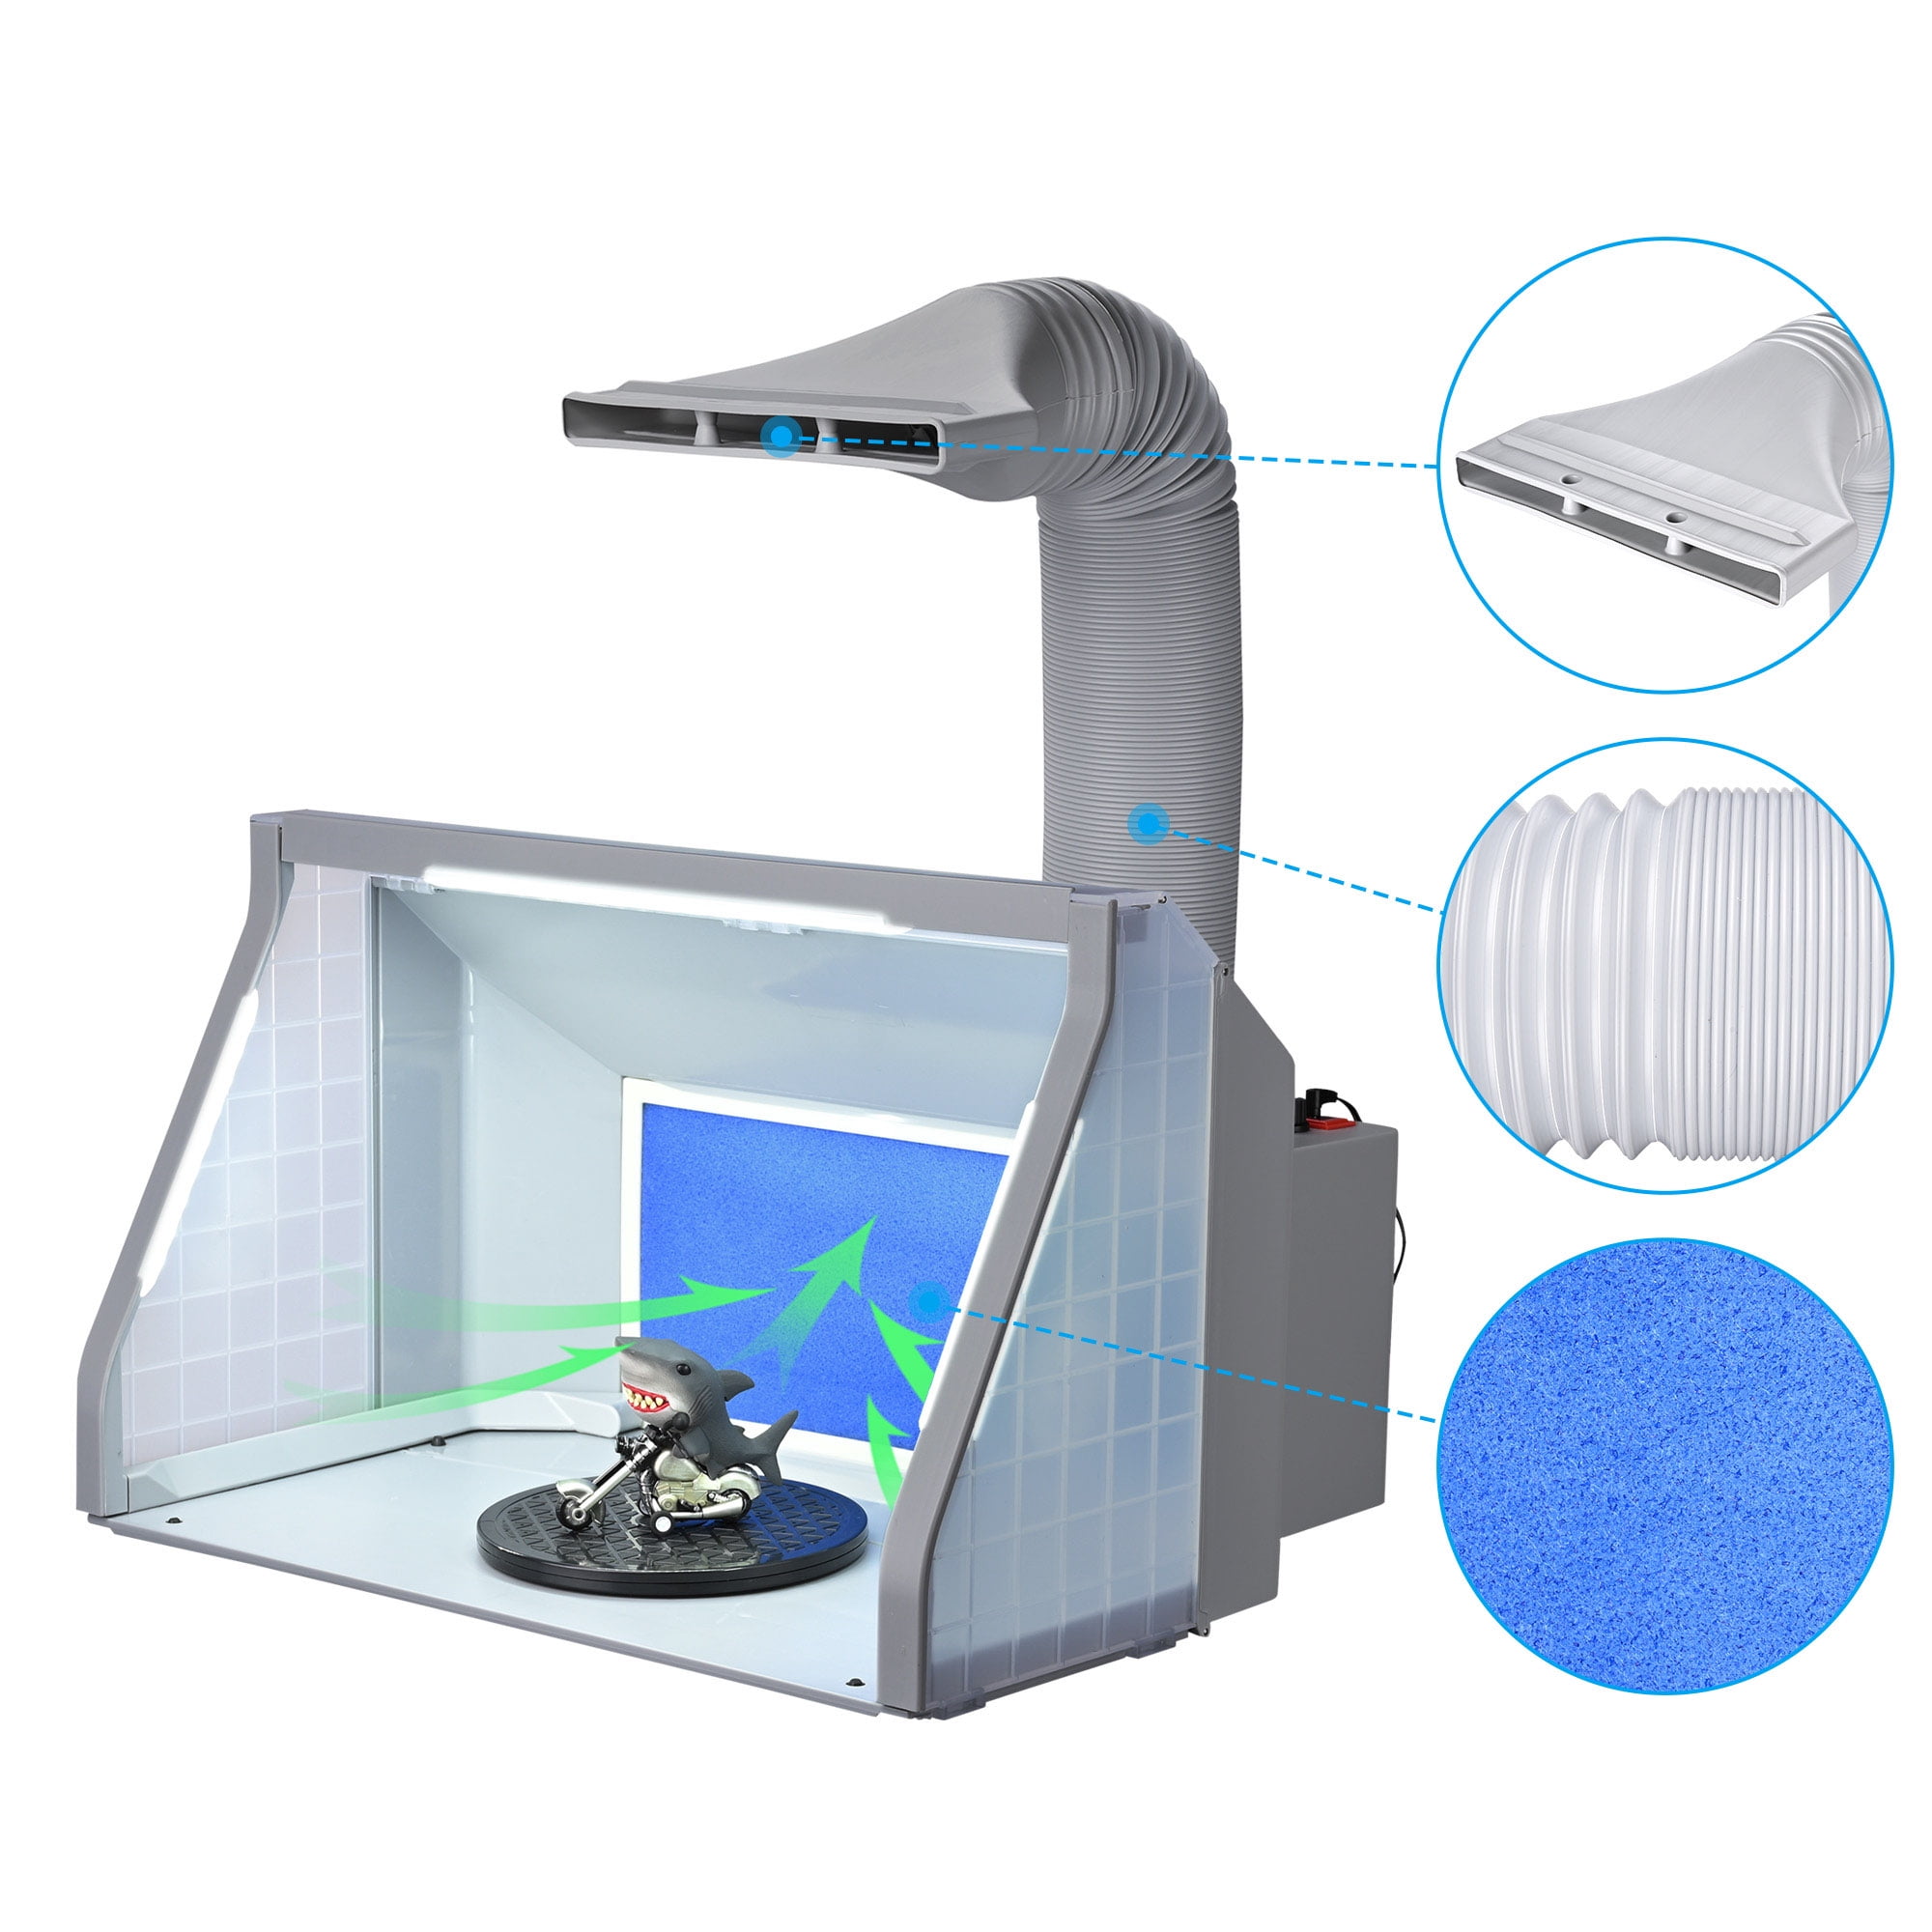 2 Sets of Airbrush Spray Booth Kit With LED Lighting Filter